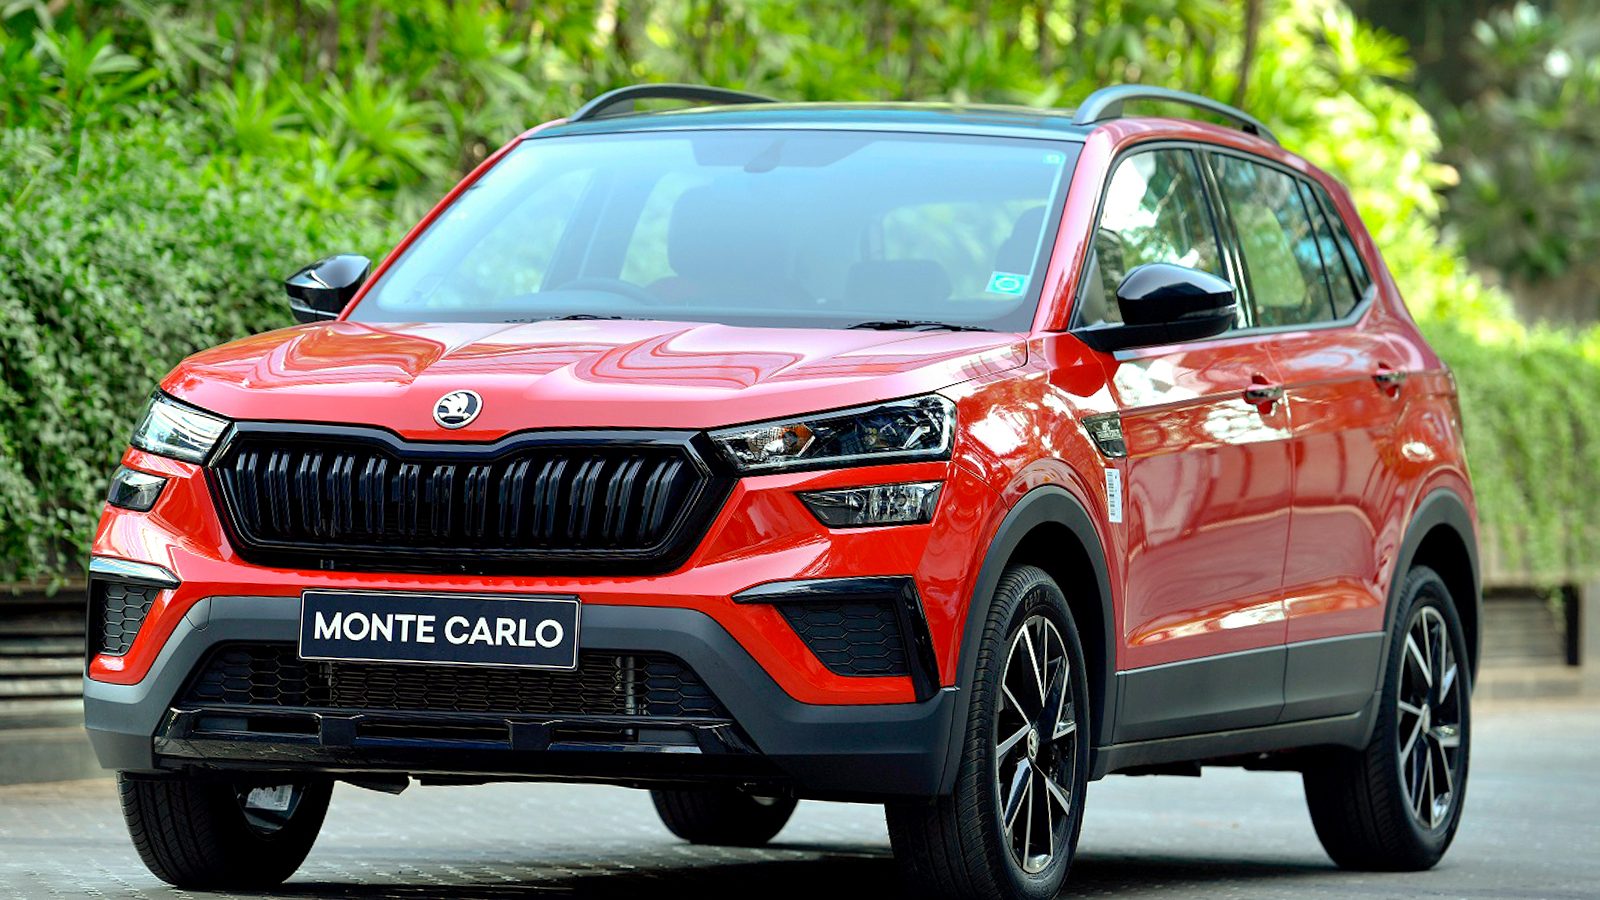 Skoda Kushaq Monte Carlo Edition Suv Launched In India At Rs